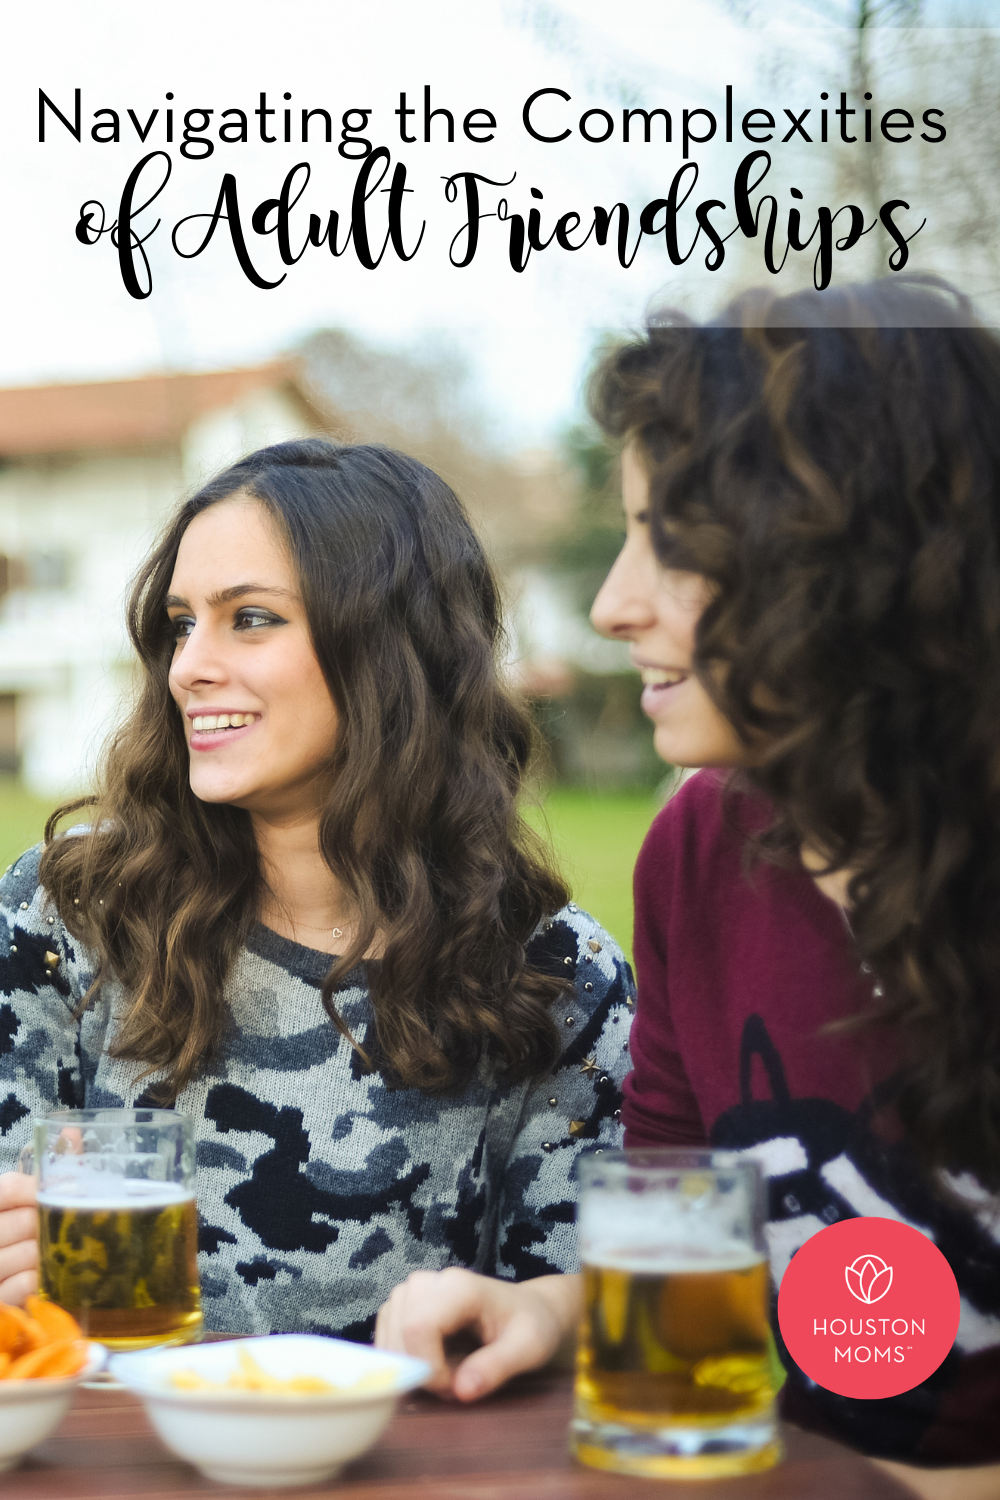 Houston Moms "Navigating the Complexities of Adult Friendships" #houstonmoms #houstonmomsblog #momsaroundhouston